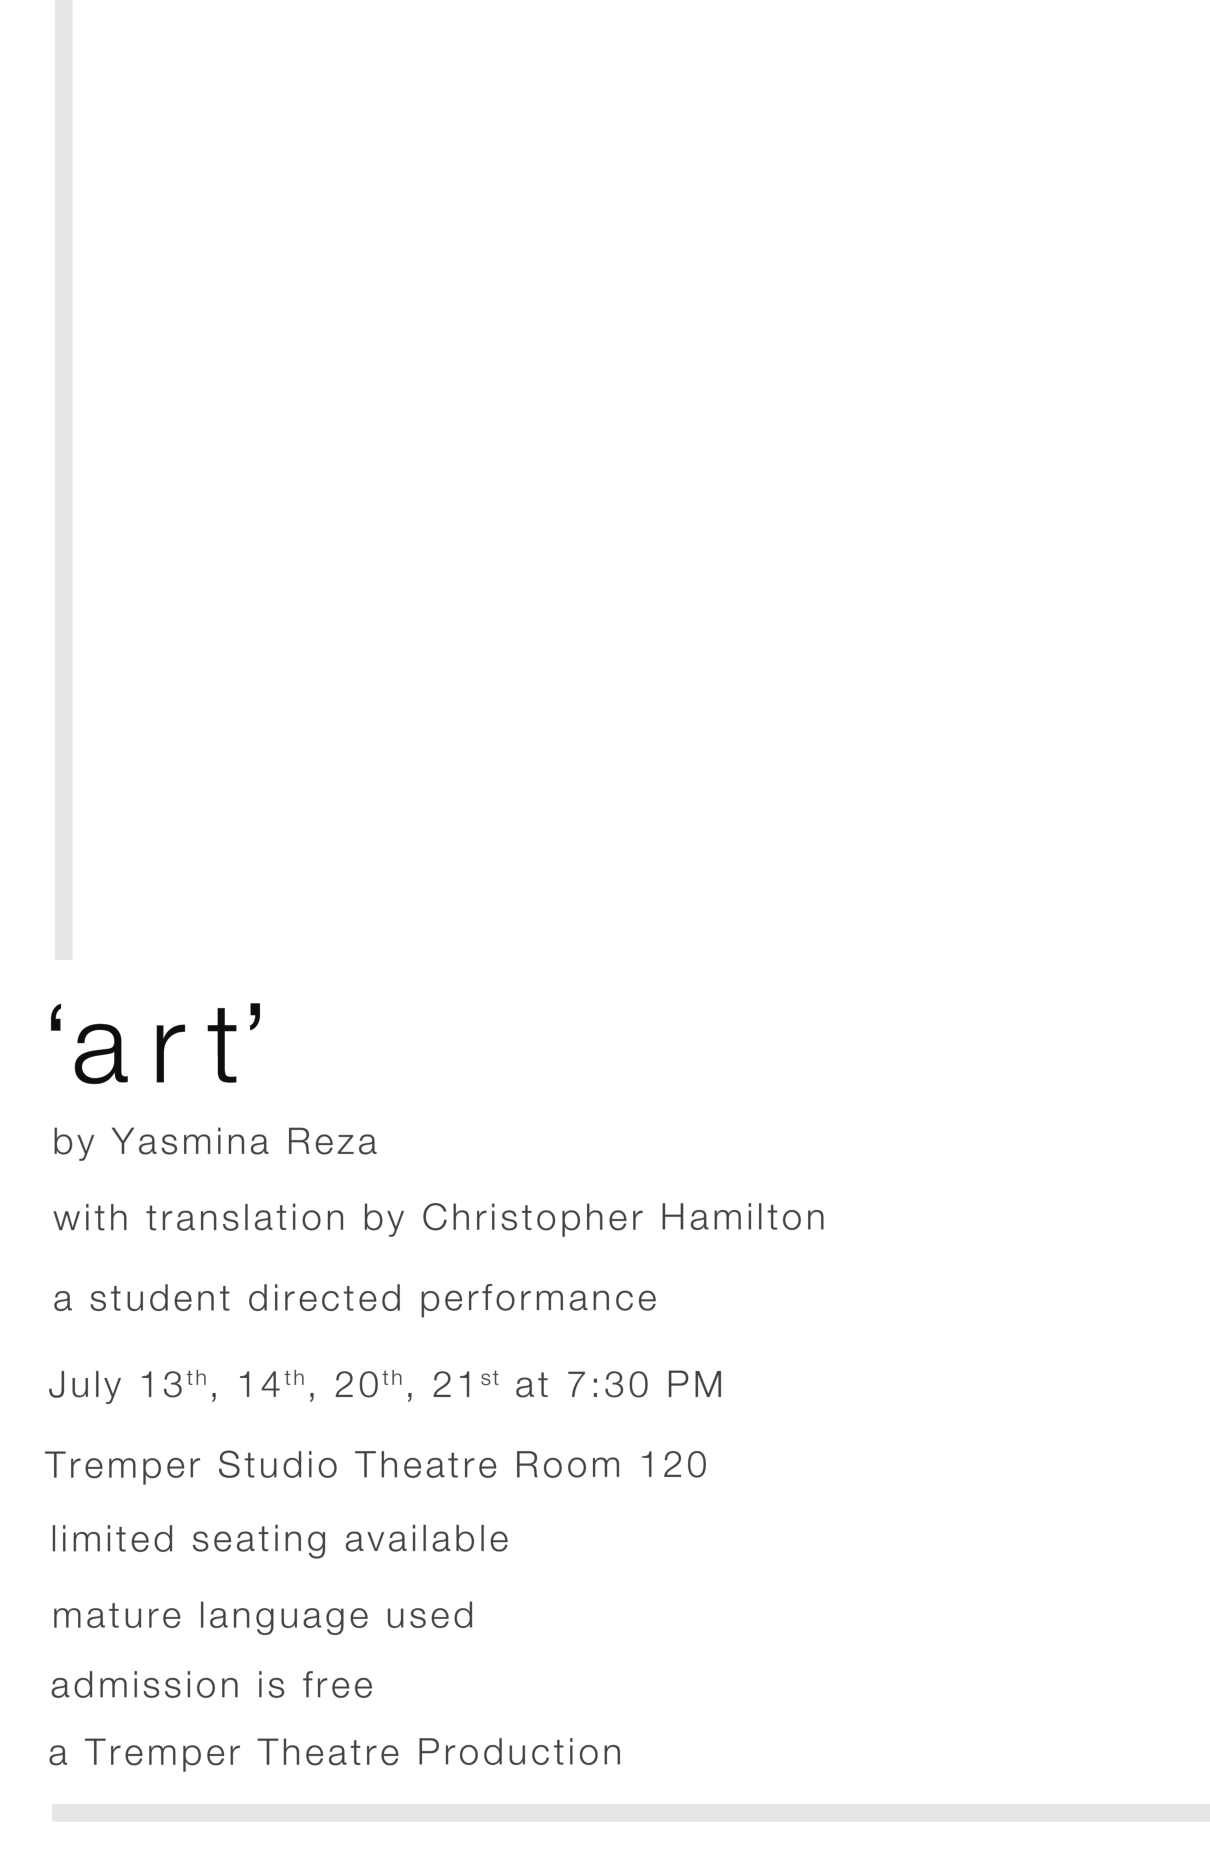 The poster for Art